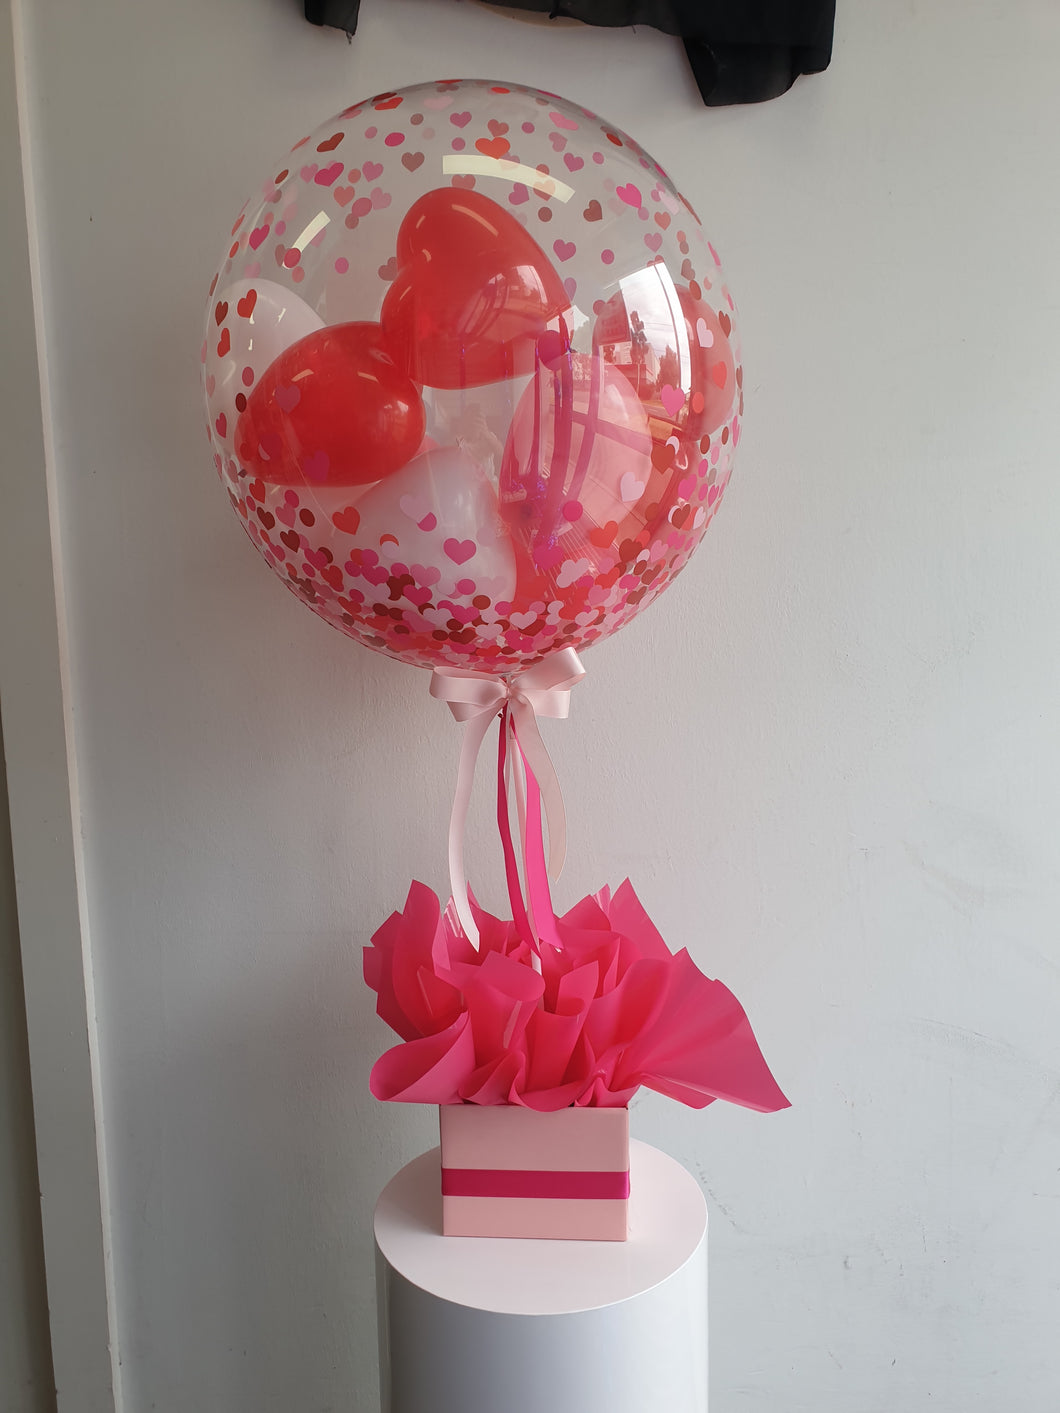 Valentines Balloon - Hearts in a bubble